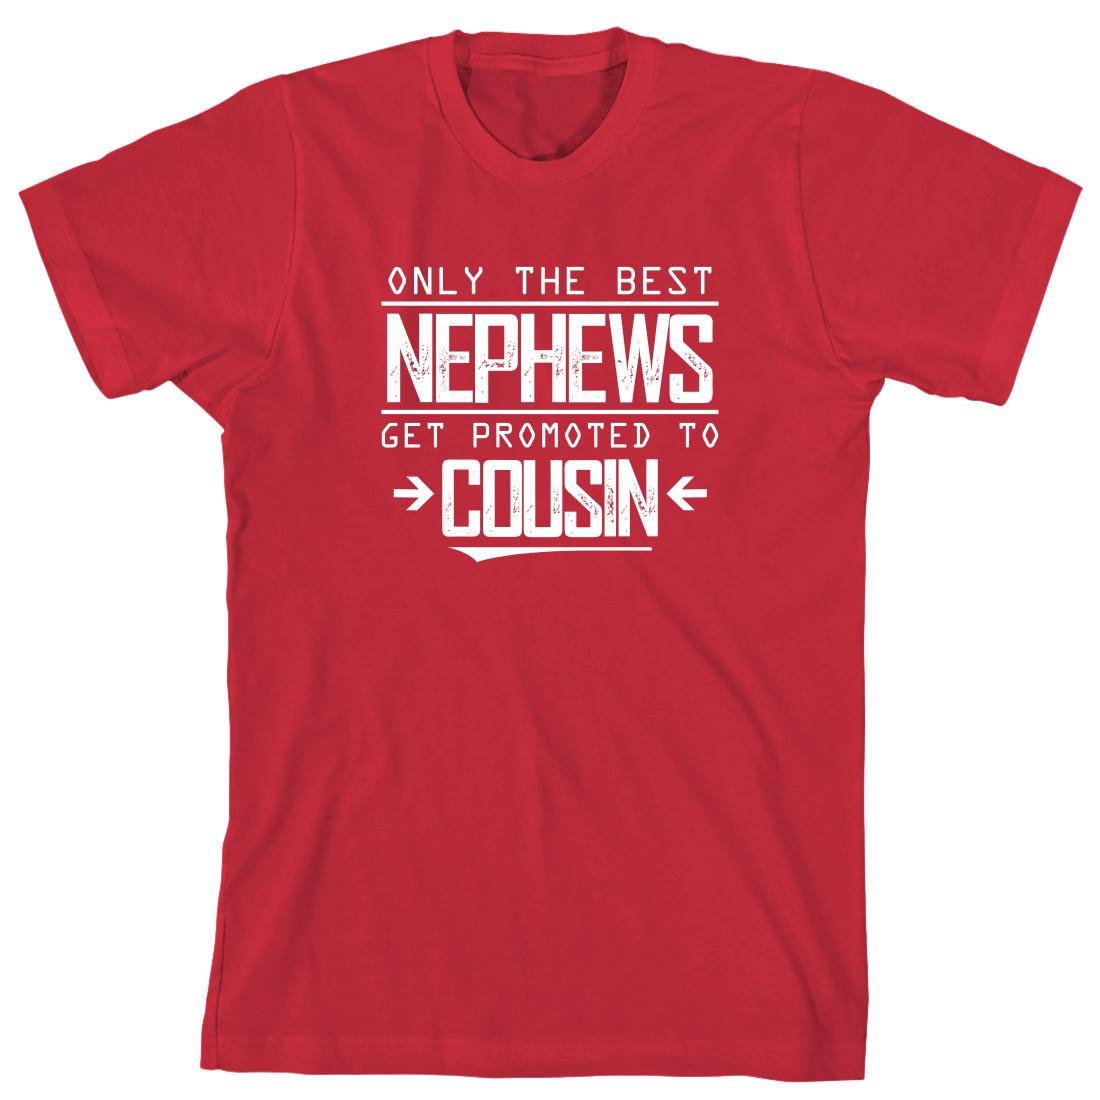 Only The Best Nephews Get Promoted To Cousin Shirt - etsy.me/2NWfZBe #clothing #shirtforbrother #newbabyarrival #babyannouncement #giftidea #bestnephew #etsy #shirts #baby #pregnant #pregnancy #newbaby #uncensoredshirts #newcousin #cousin #newmom